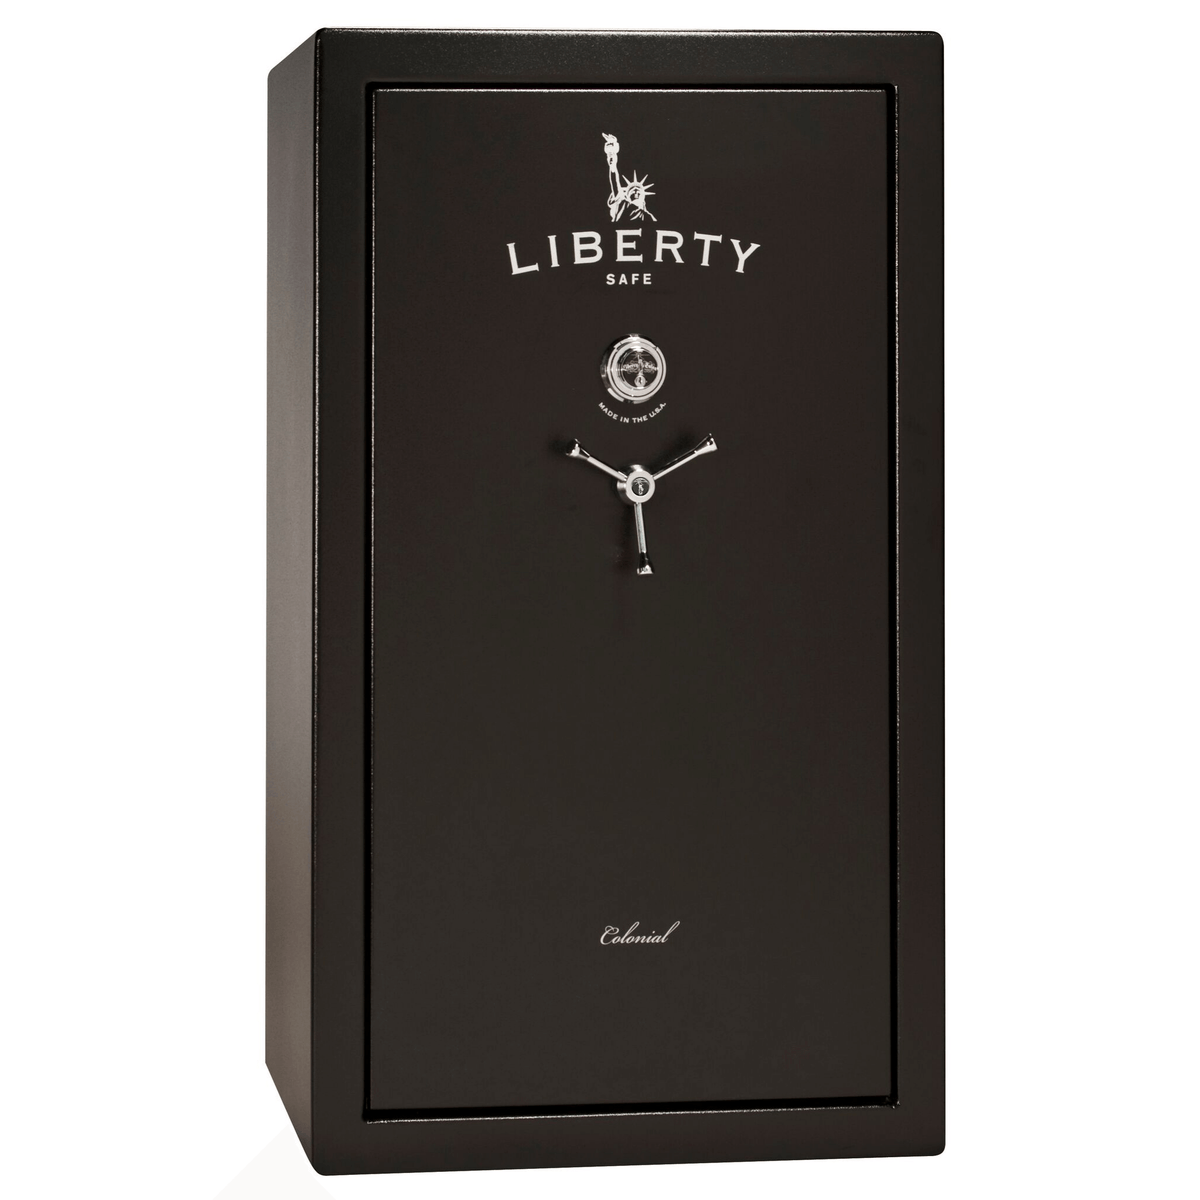 Liberty Colonial 30 Safe in Textured Black with Chrome Mechanical Lock.